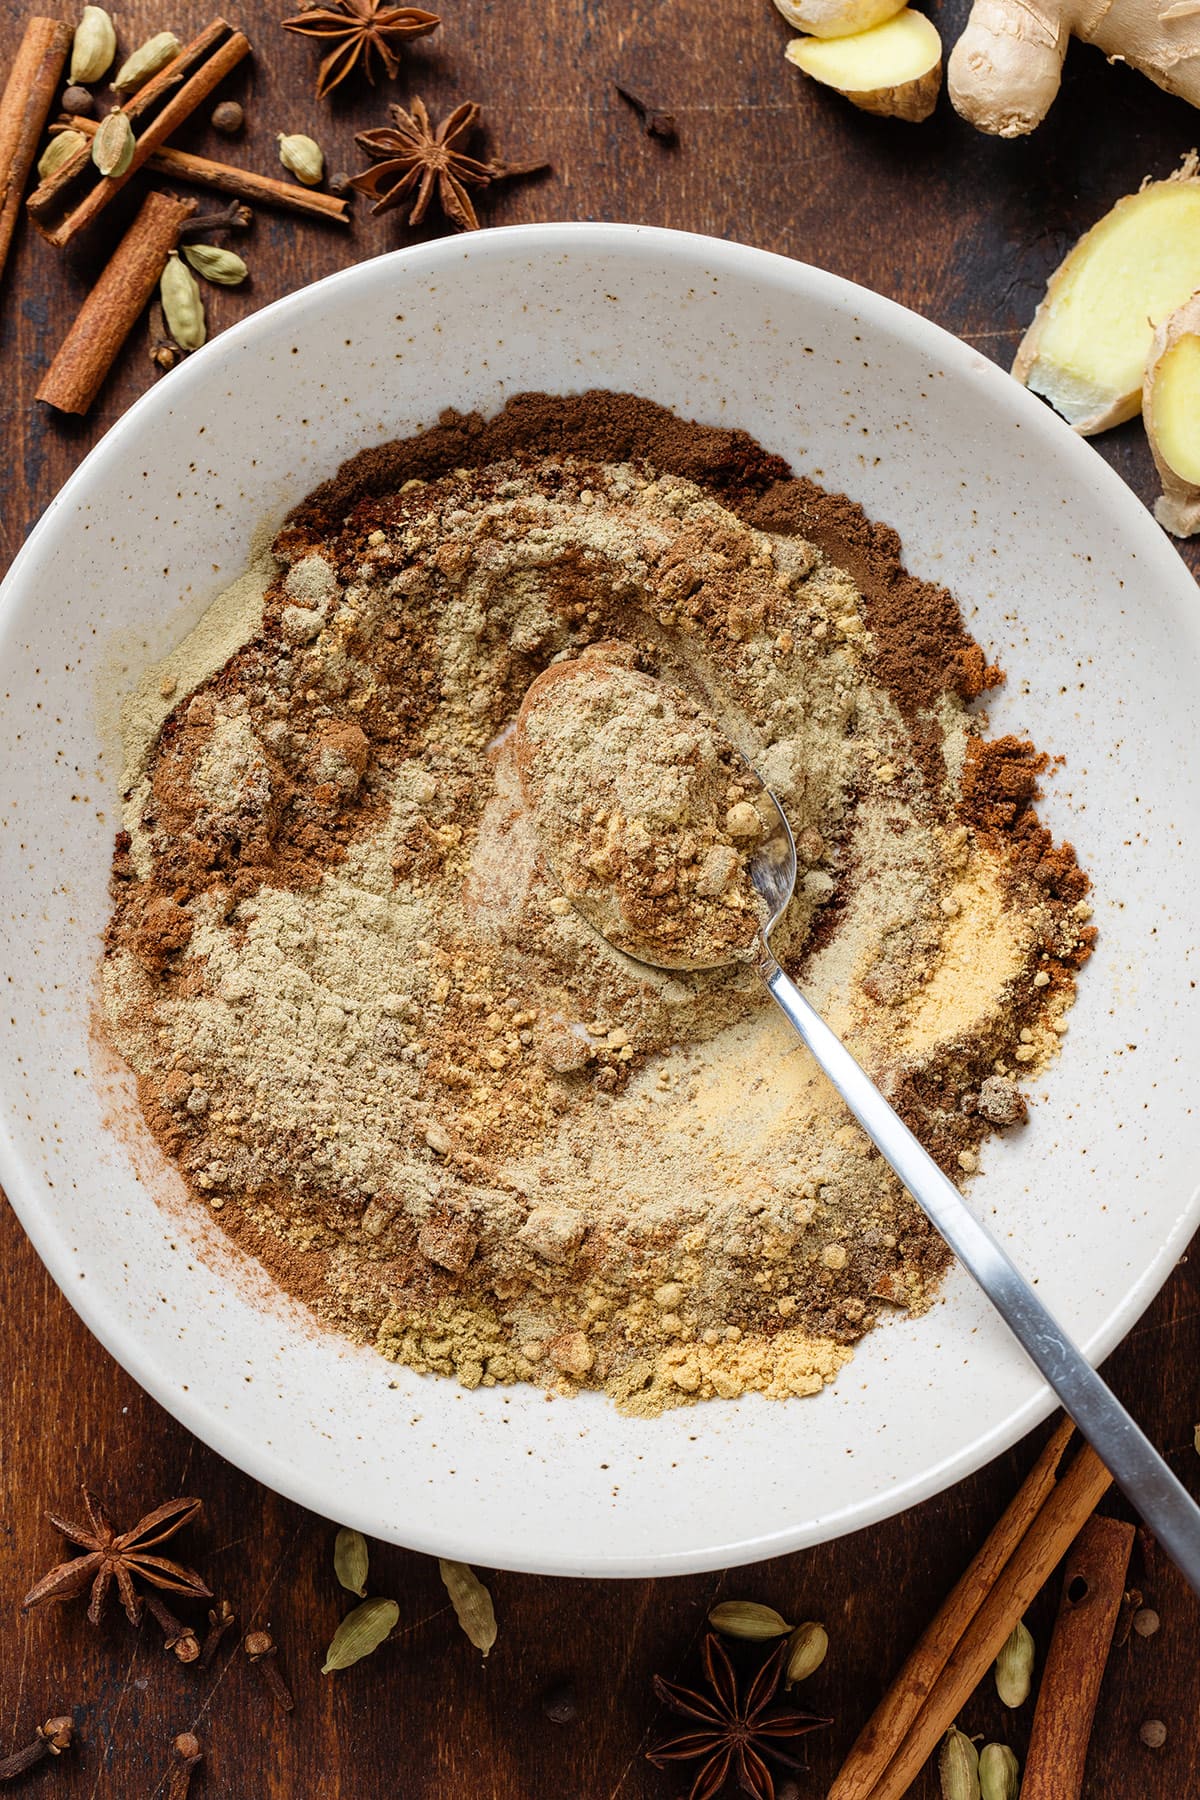 Ground spices in a beige bowl partially stirred together with a silver spoon resting on the side.